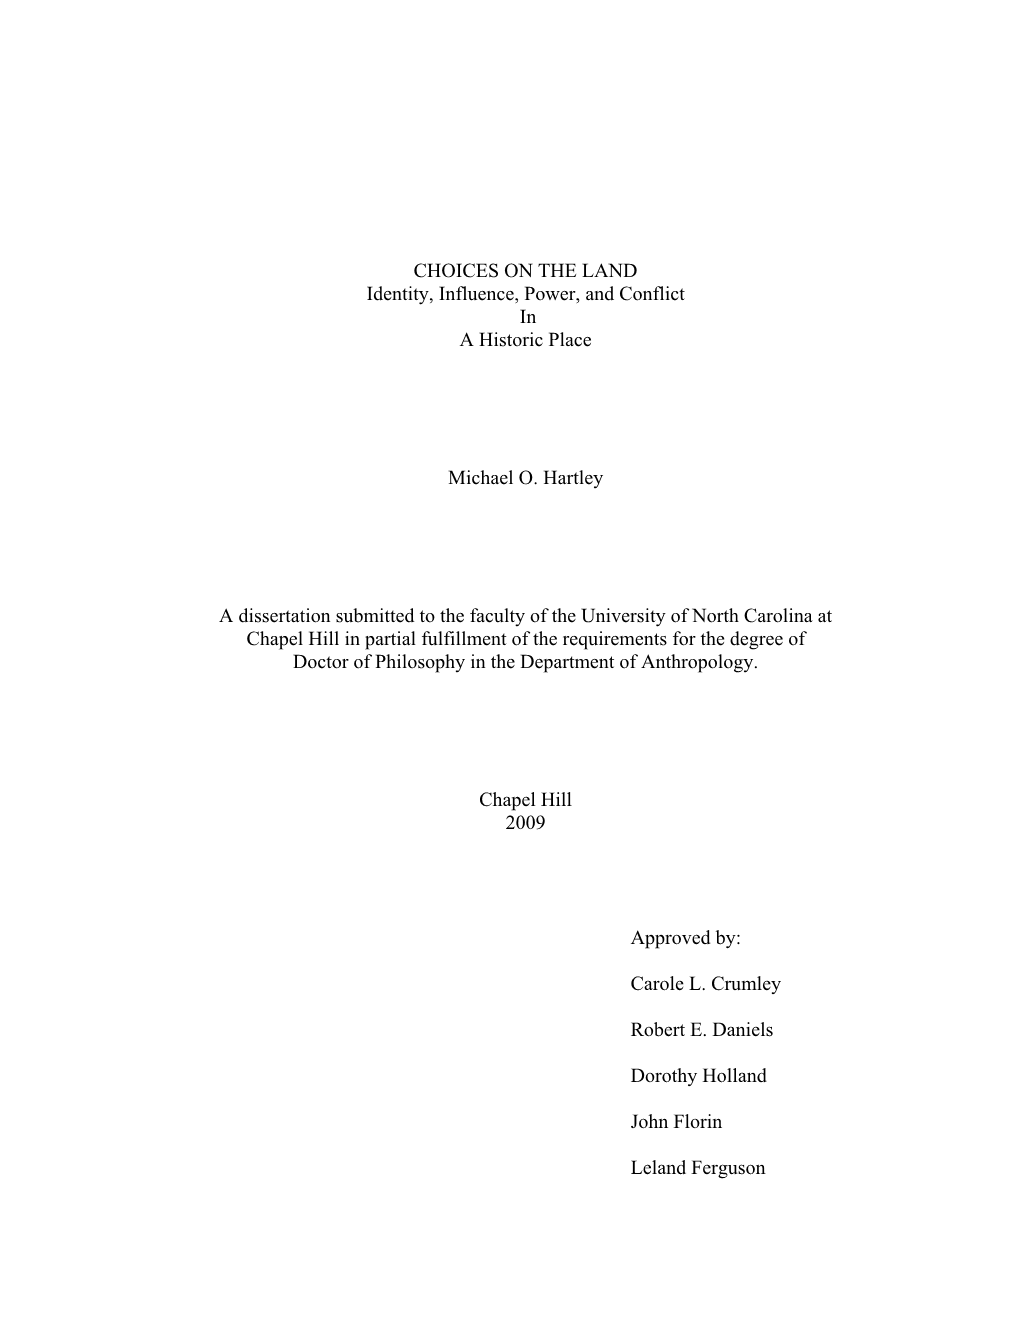 CHOICES on the LAND Identity, Influence, Power, and Conflict in a Historic Place Michael O. Hartley a Dissertation Submitted To